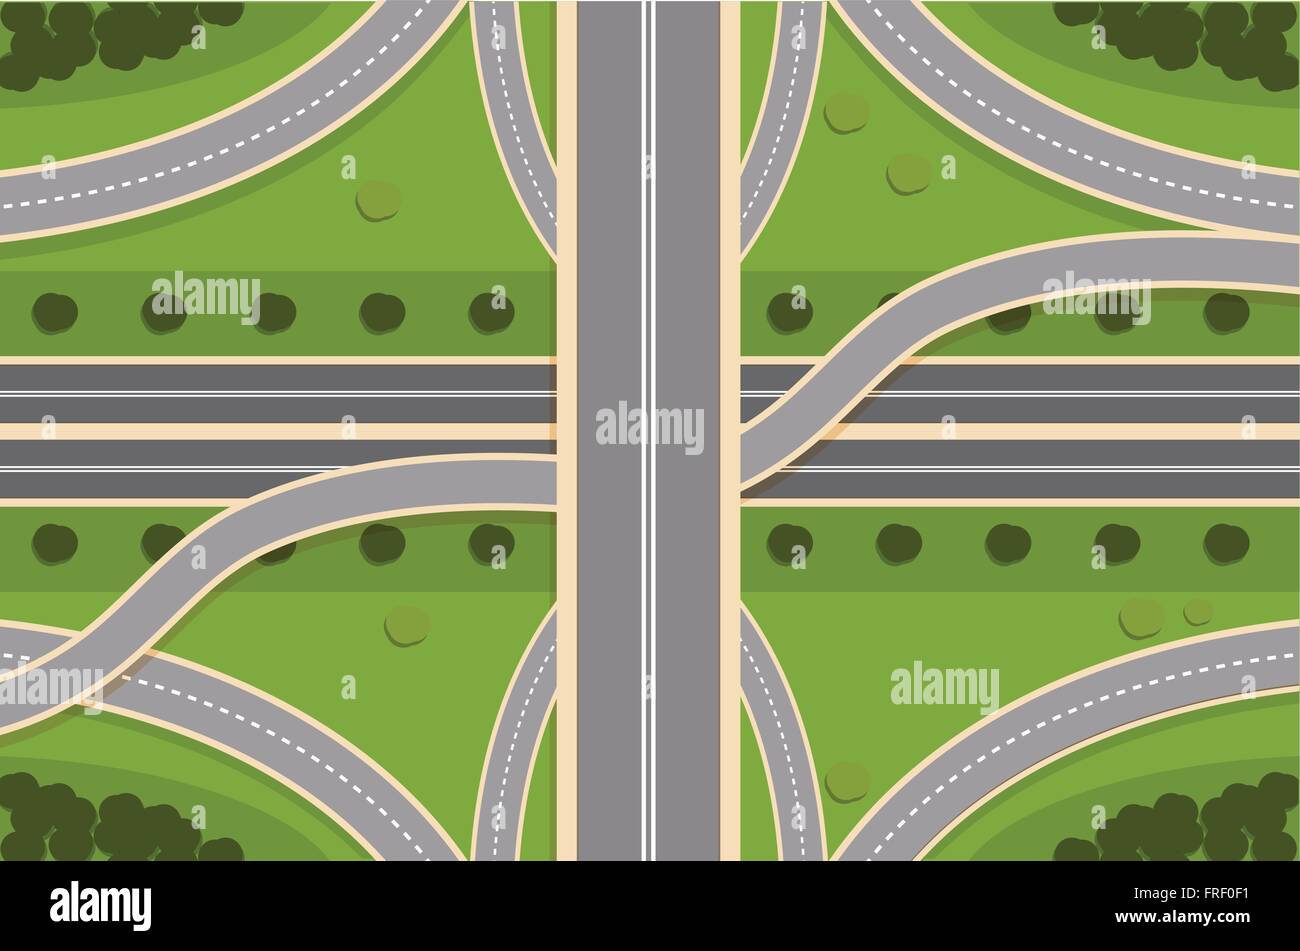 Aerial View - Top View Roads Intersections, Highways Stock Vector